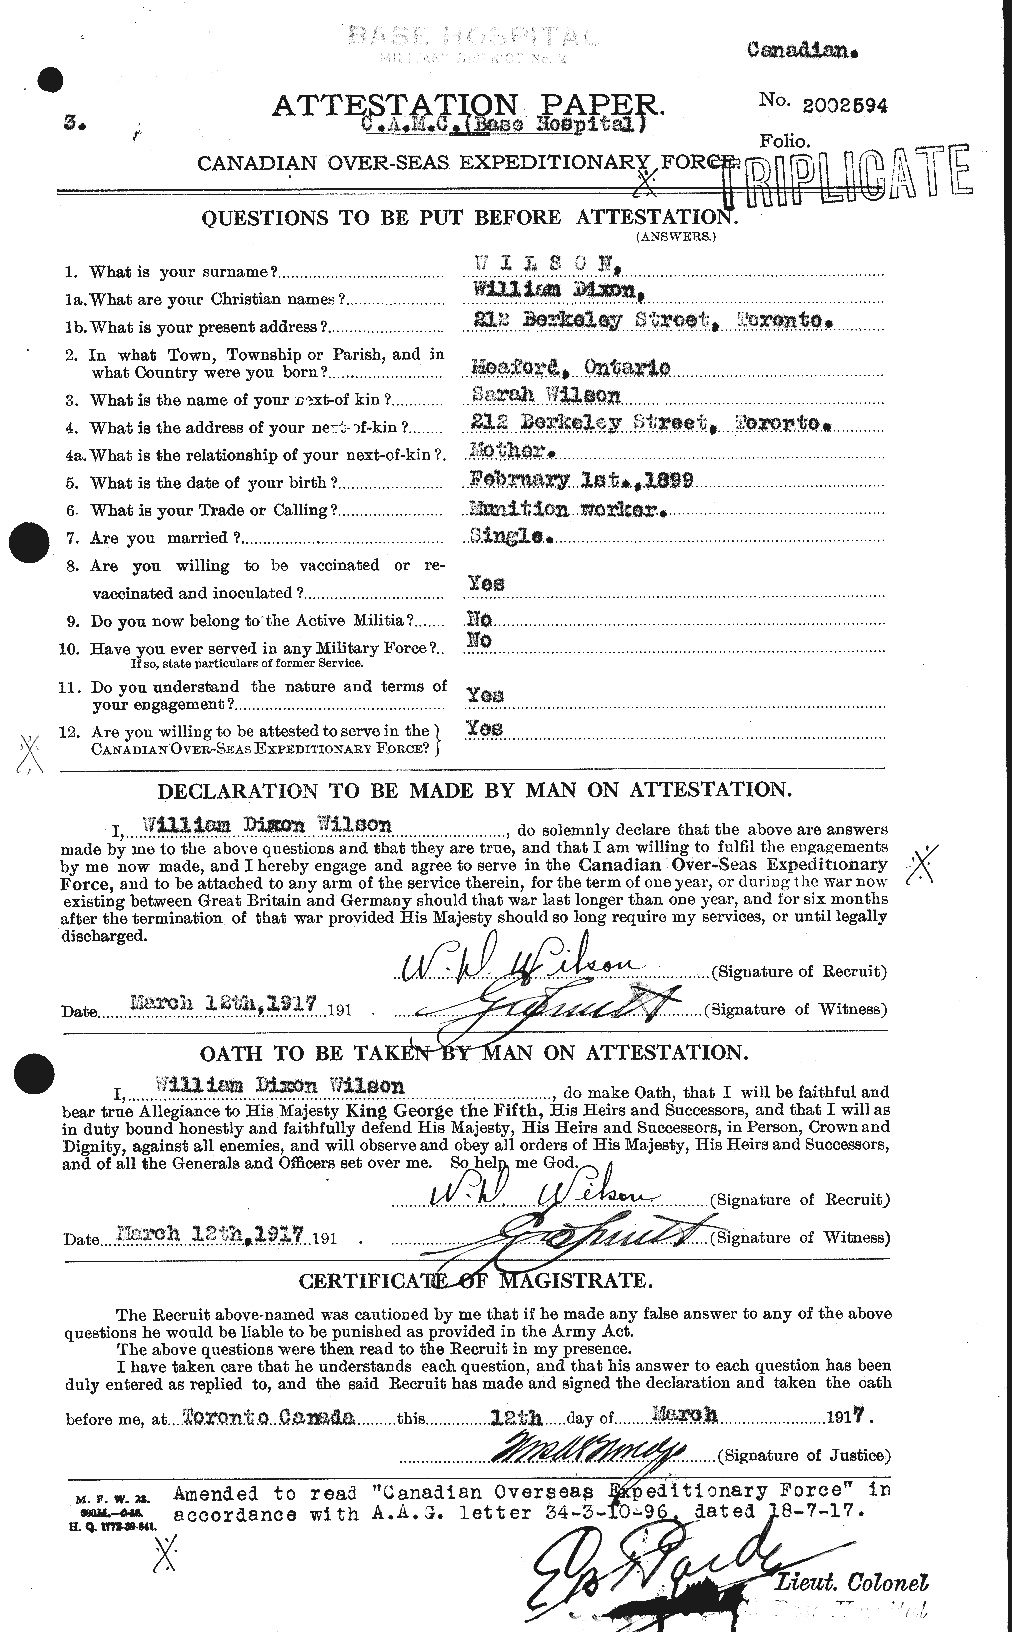 Personnel Records of the First World War - CEF 681966a